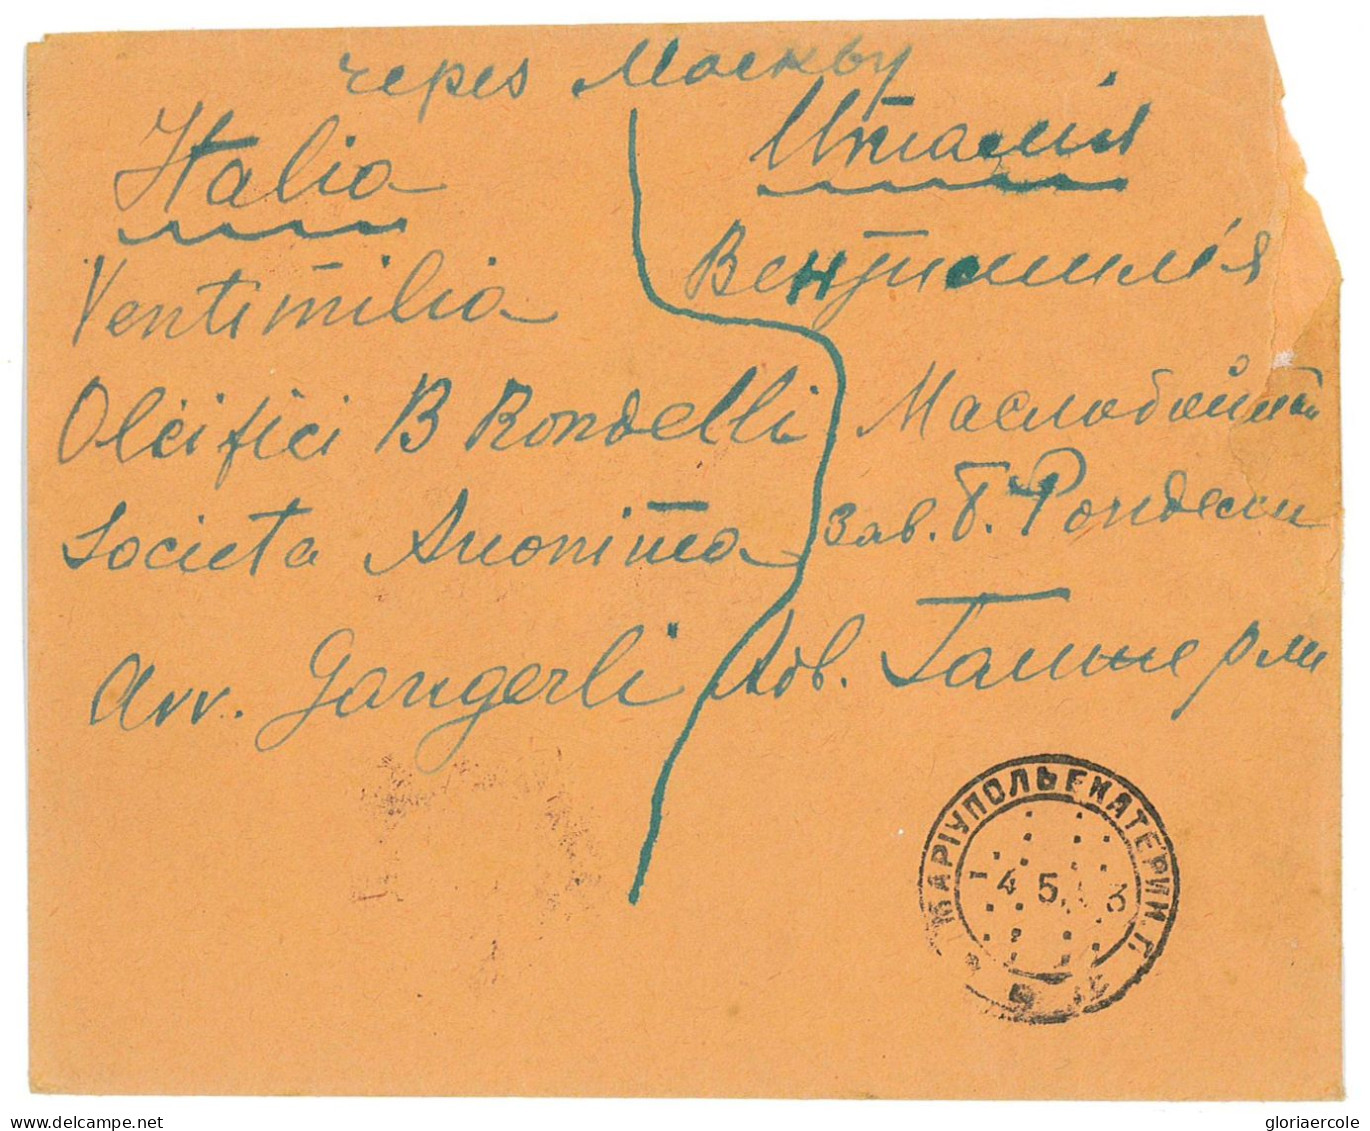 P2914 - RUSSIA , NICE FRESH COVER MIXED FRANKING. 650 RUBEL RATE TO ITALY - Brieven En Documenten